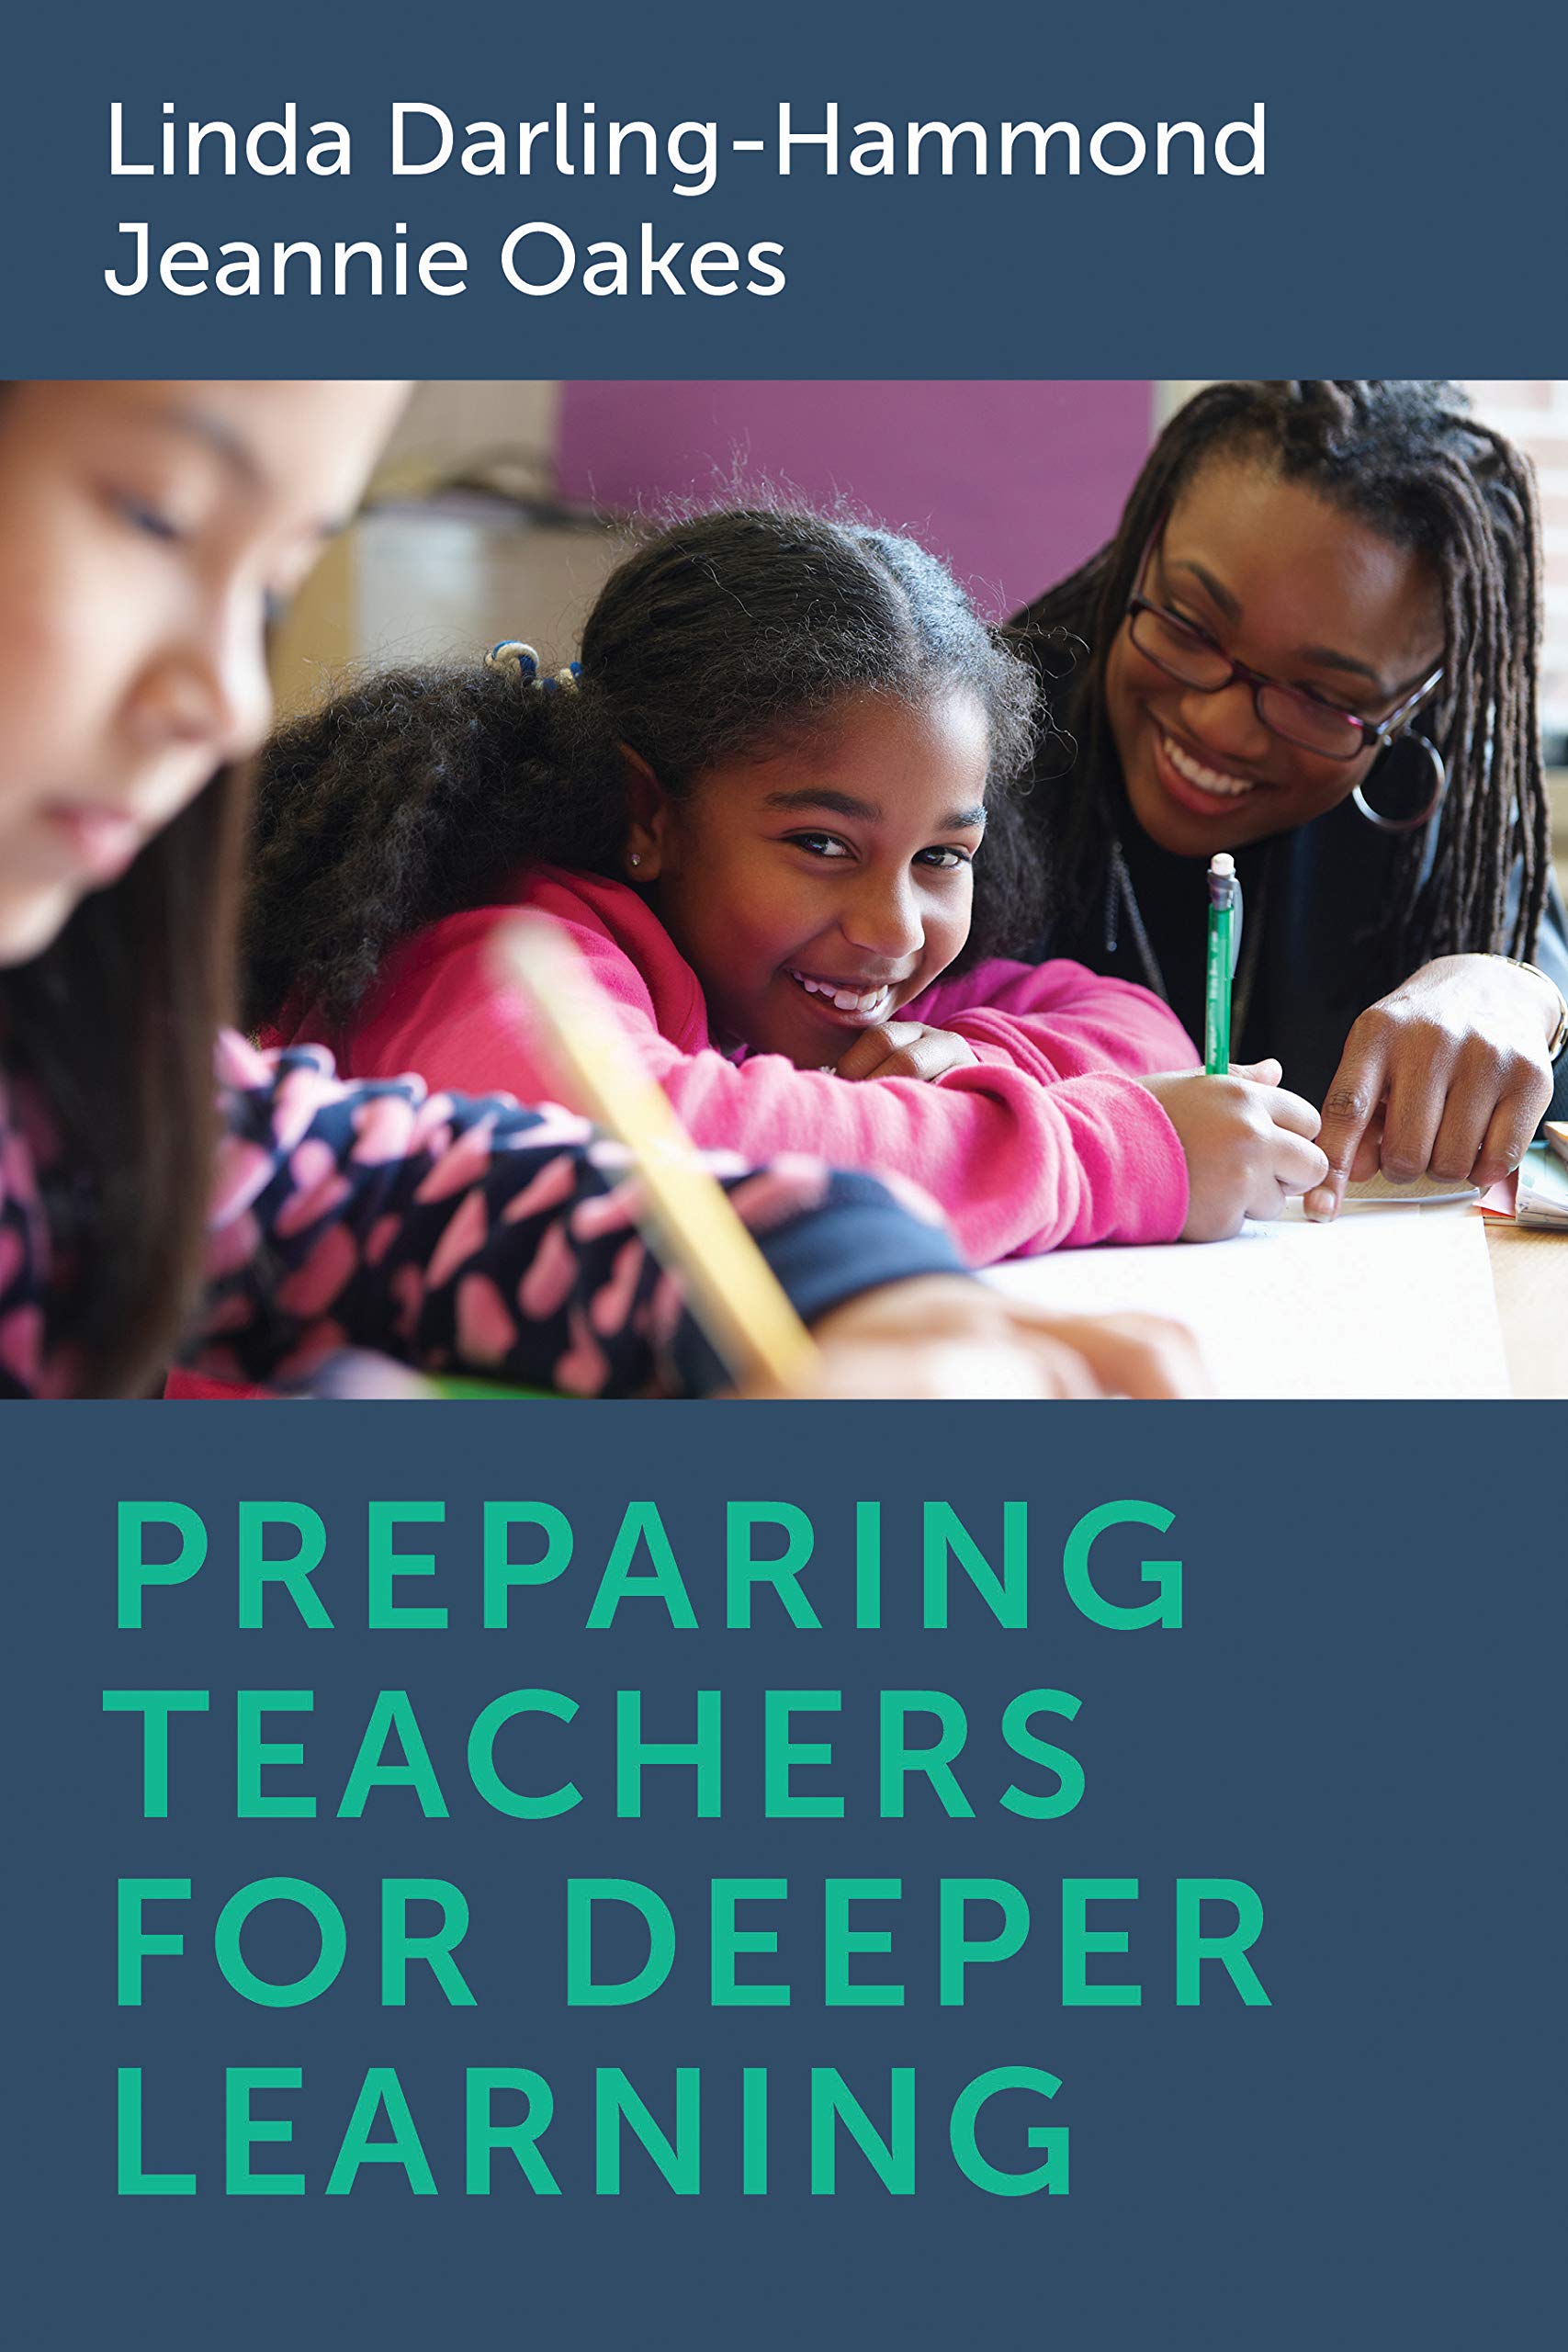 Preparing Teachers for Deeper Learning by Linda DarlingHammond and